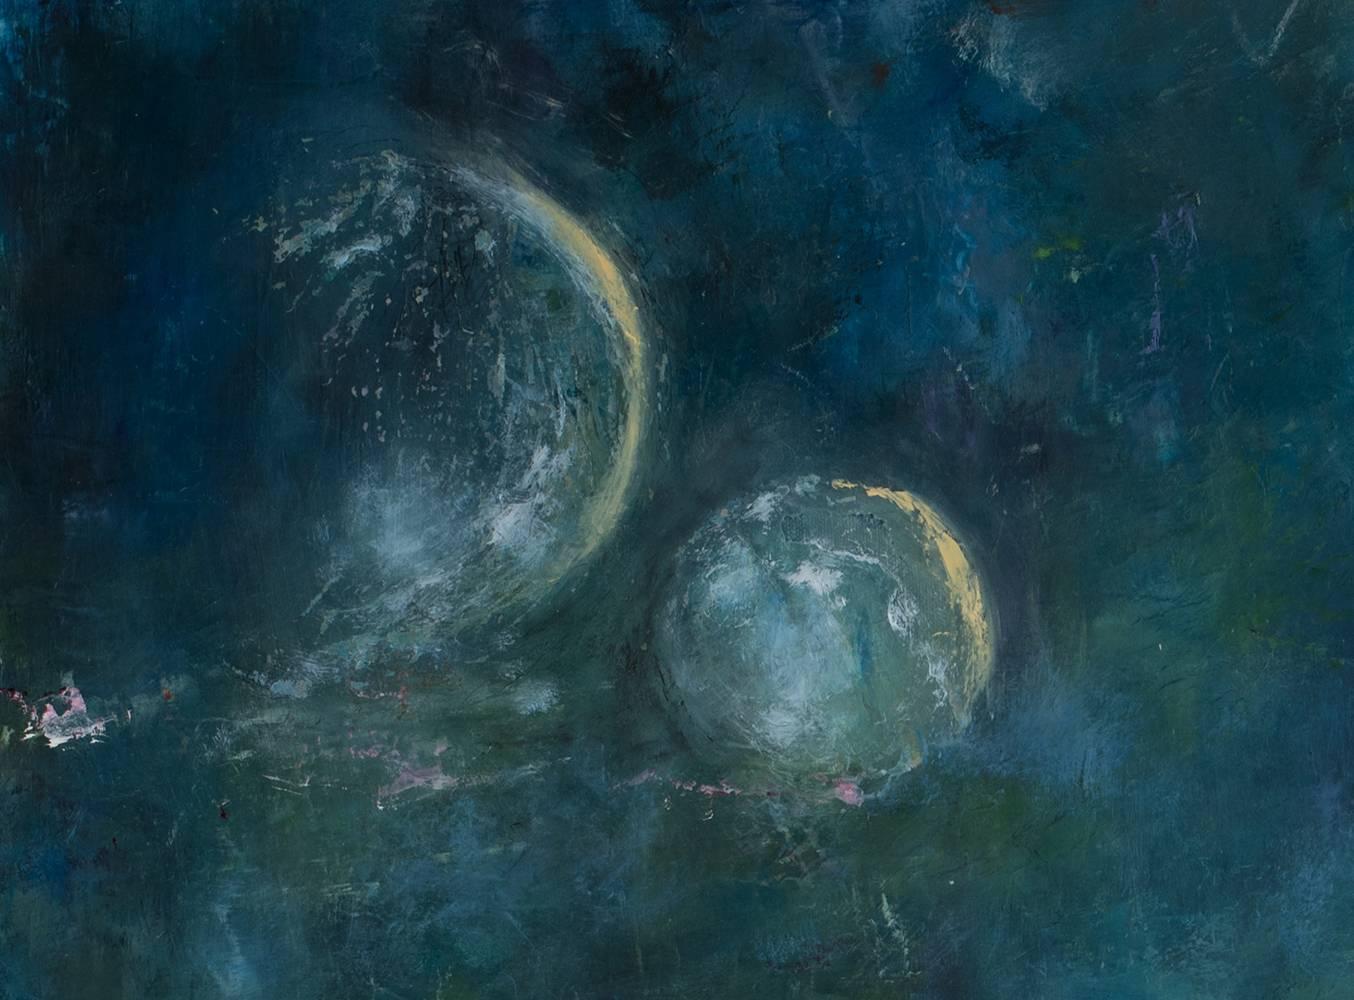 Water Worlds - Painting by Arica Hilton